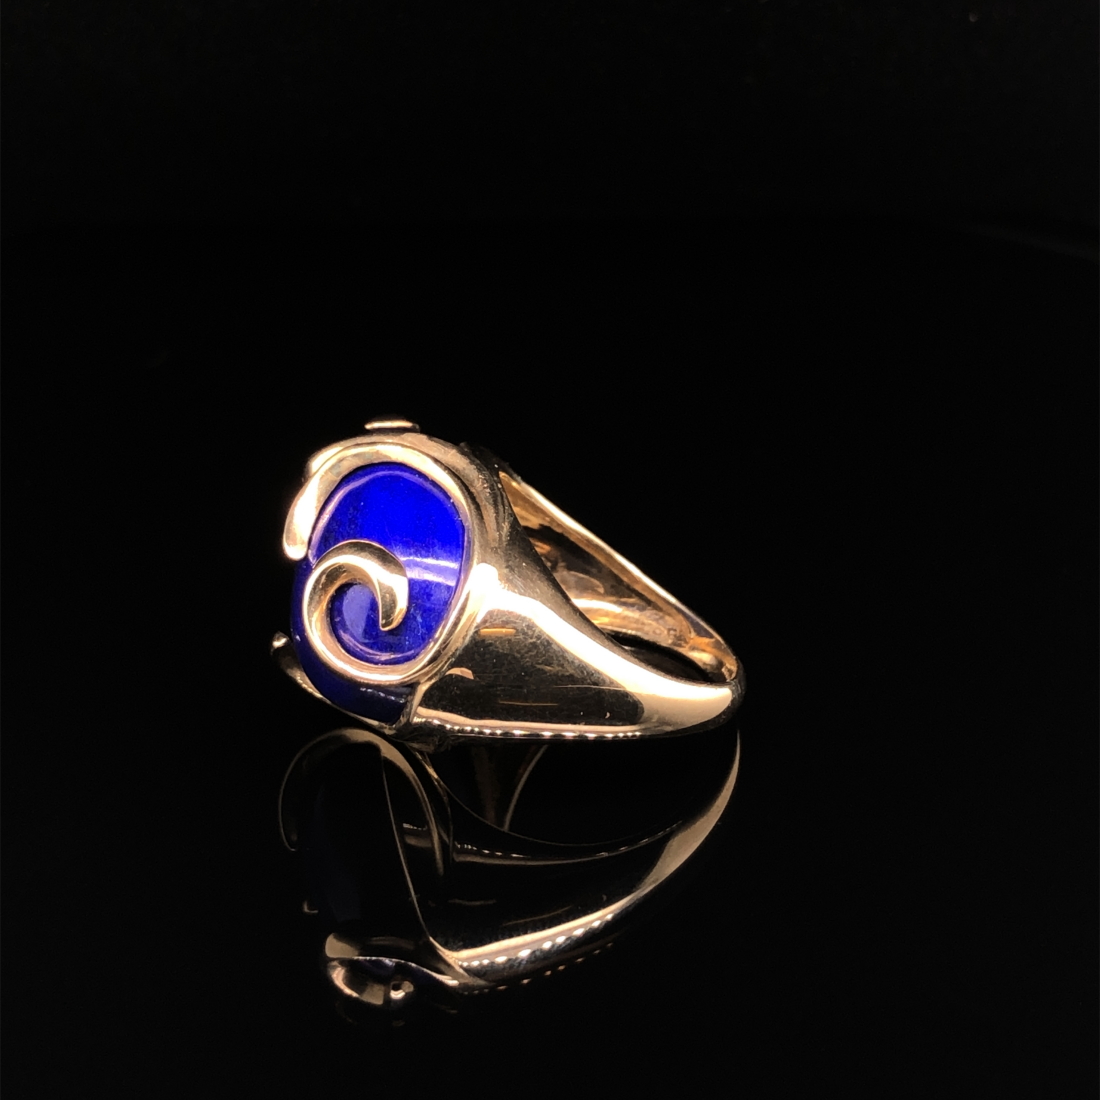 A CONTEMPORARY LAPIS LAZULI AND 9ct HALLMARKED GOLD RING. FINGER SIZE K. WEIGHT 8.73grms. - Image 3 of 8